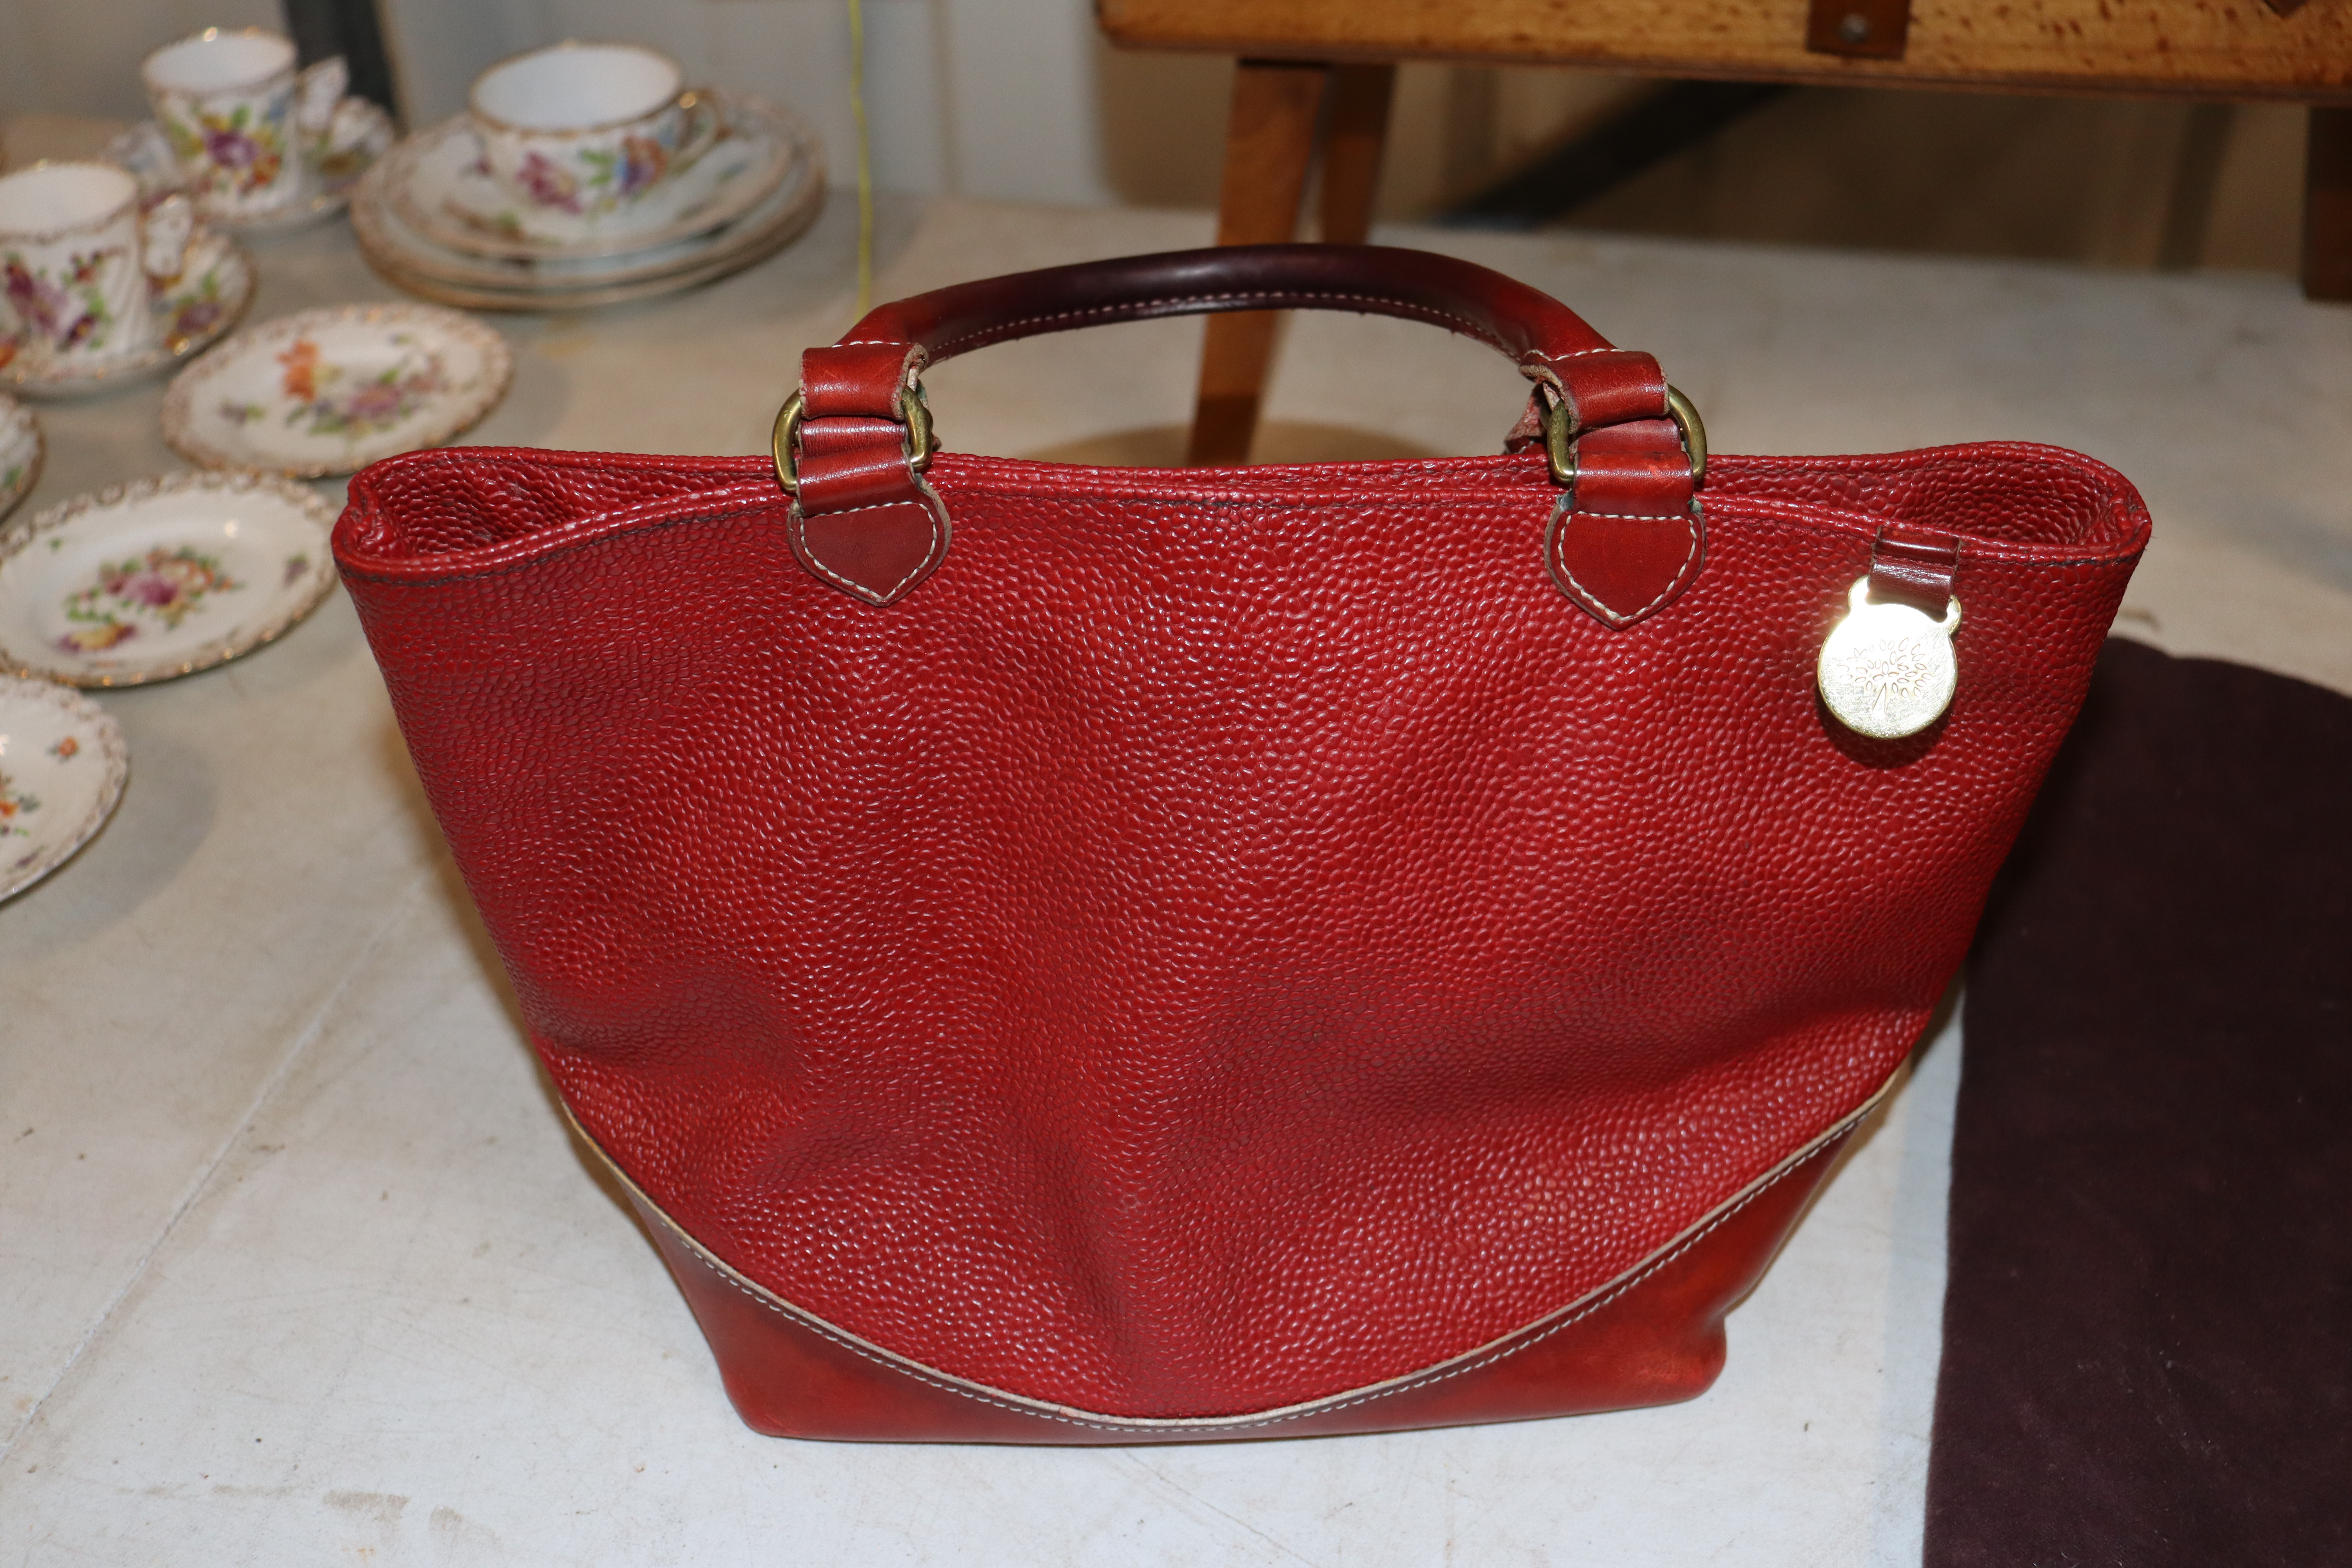 A Mulberry red handbag and outer carry bag - Image 3 of 8